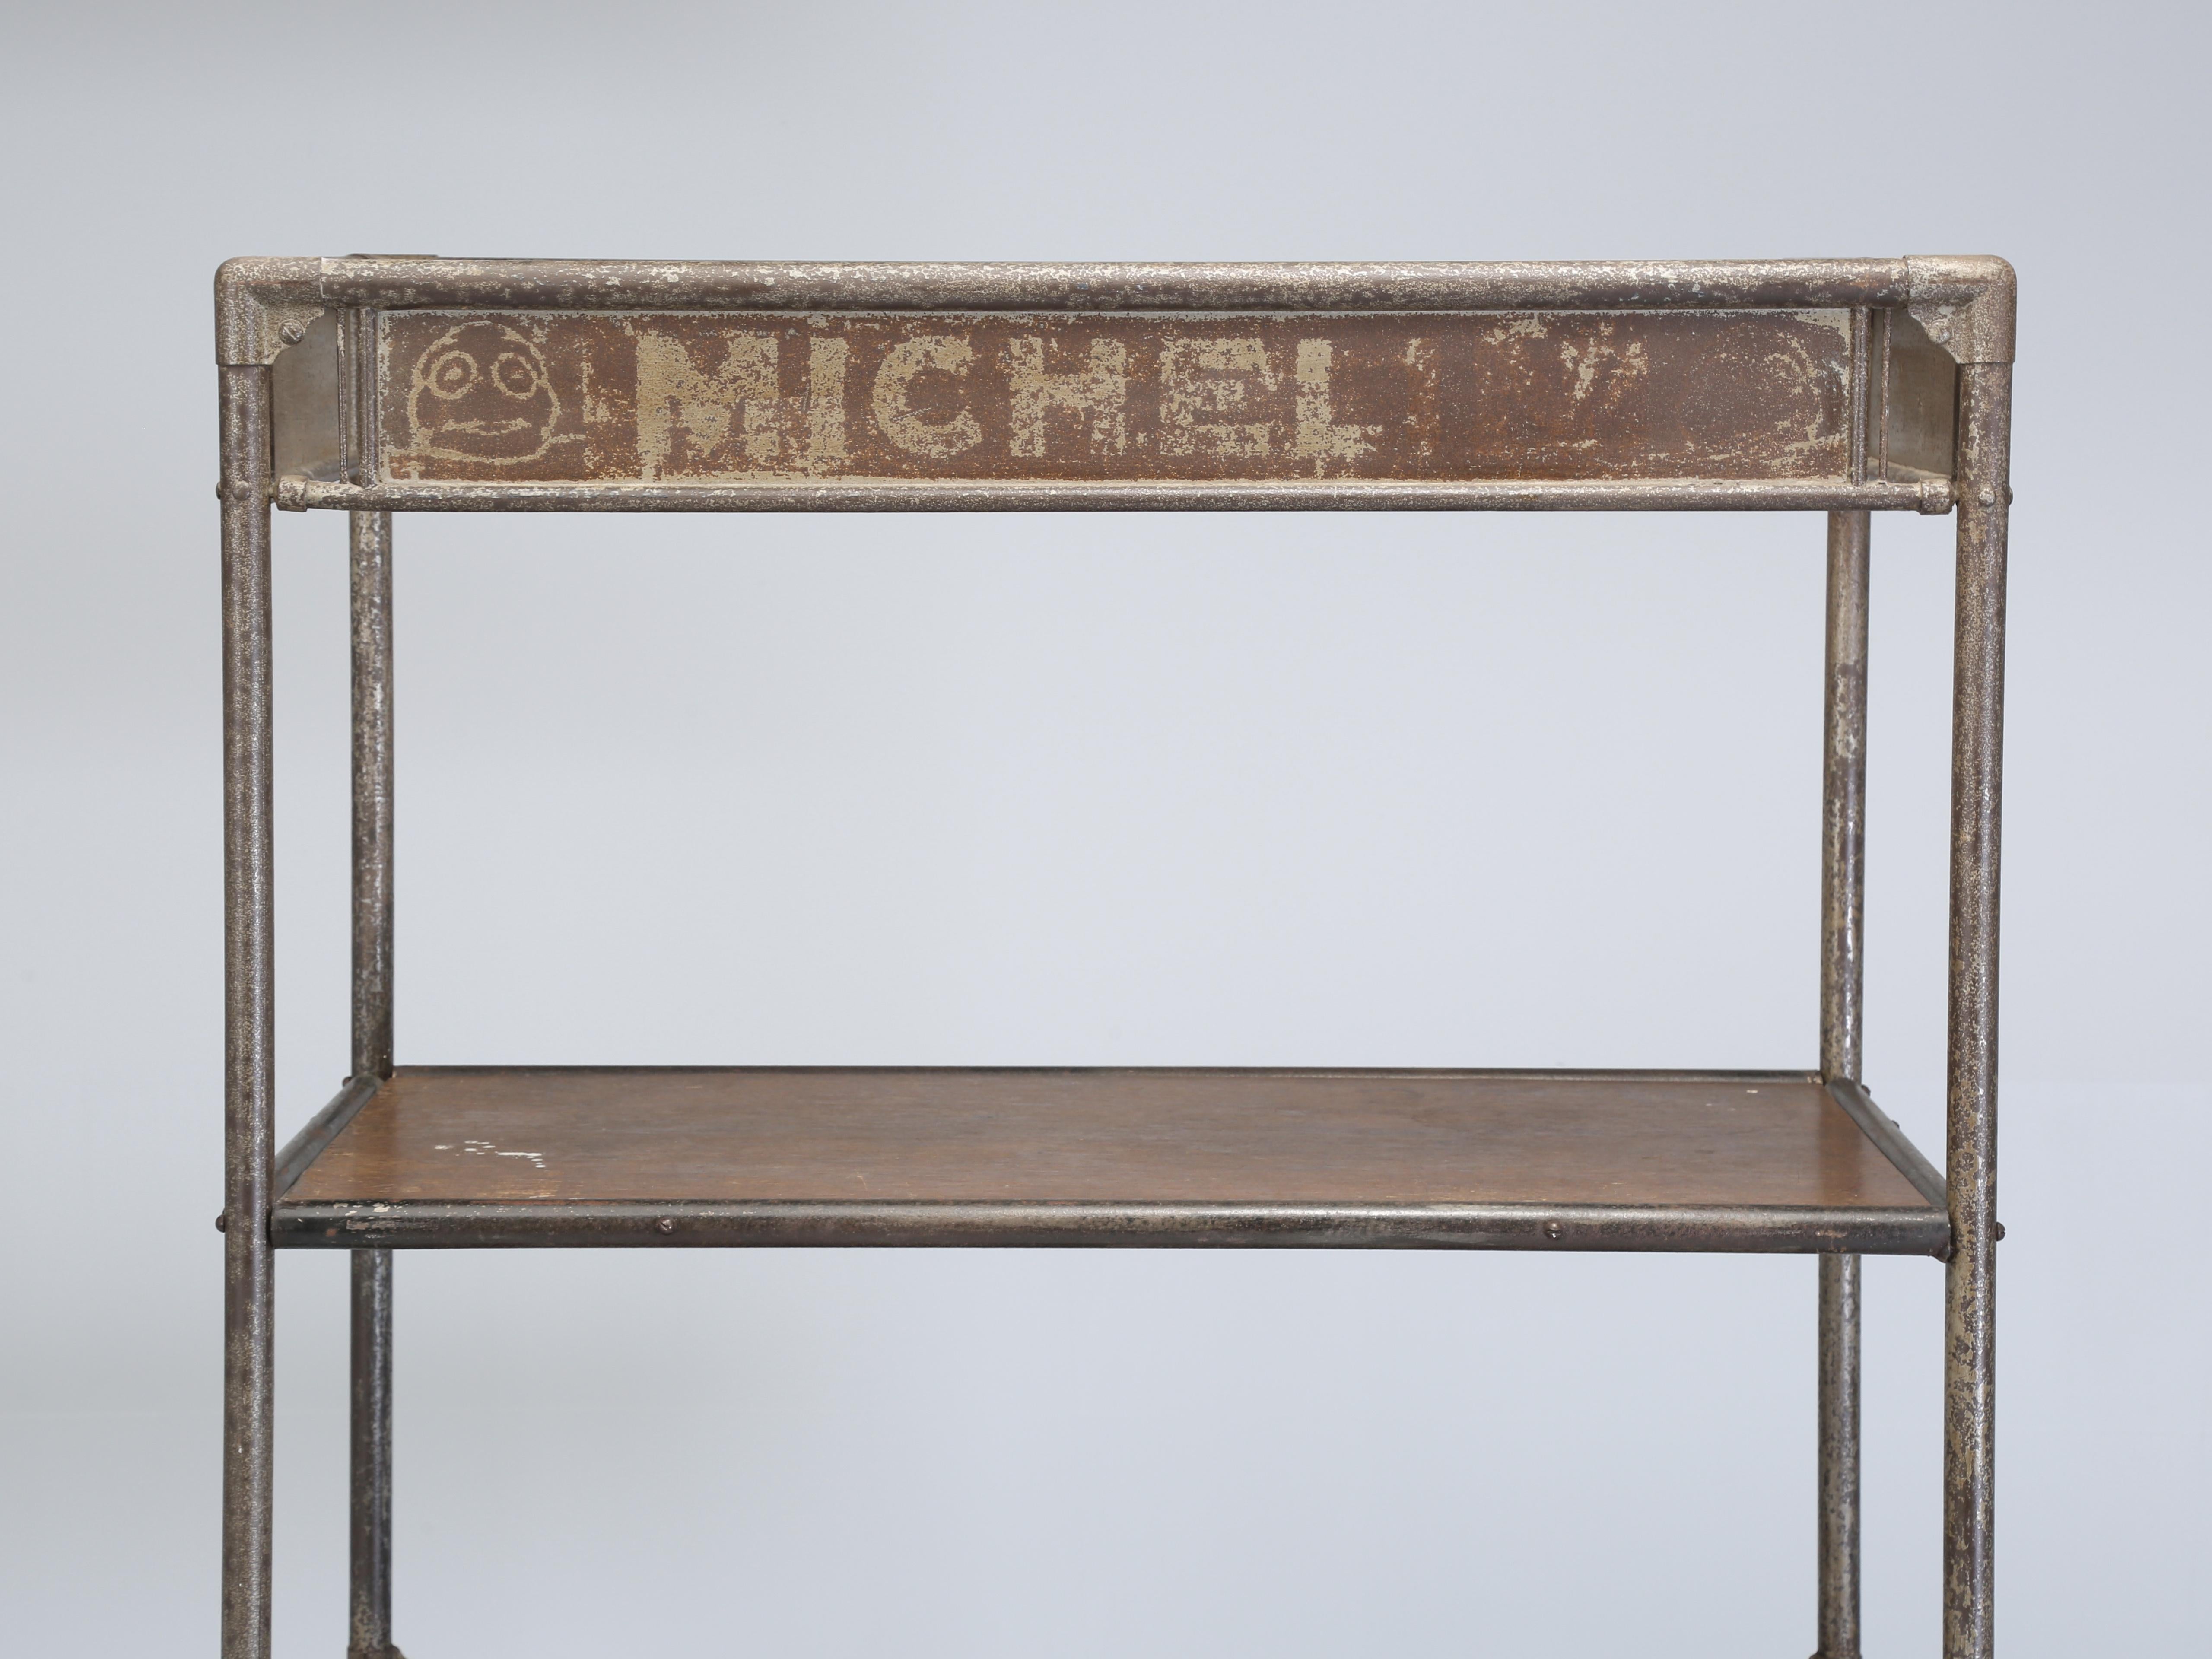 Early 20th Century Michelin Antique French Industrial Steel Shelf Unit Made in France c1900-1920 For Sale